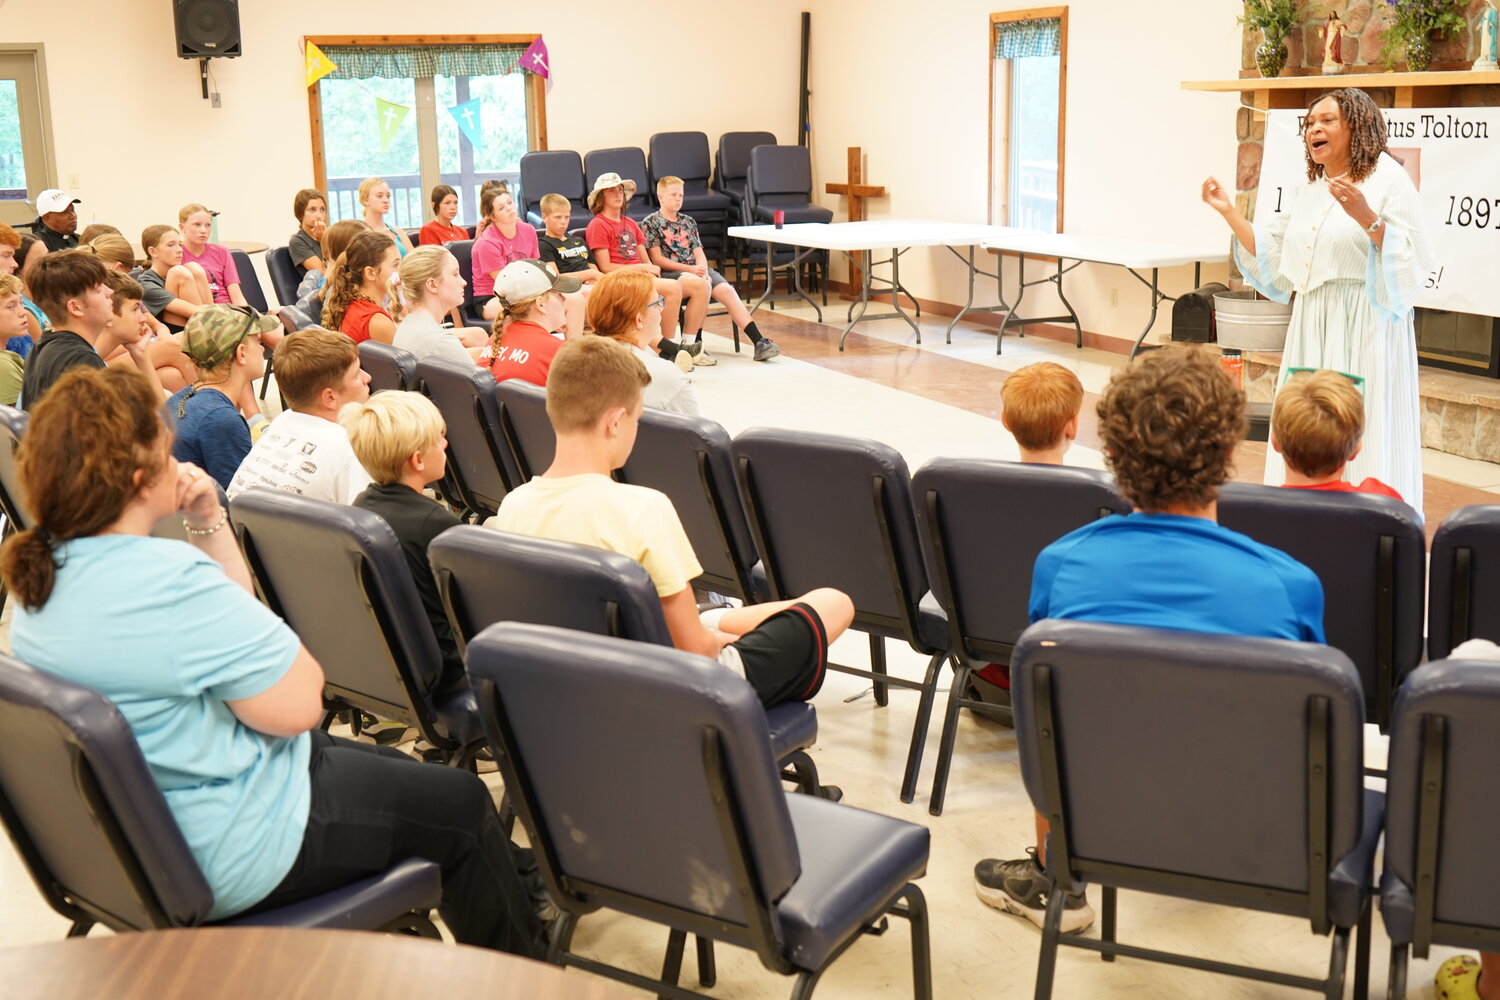 Participants in this year’s Camp Tolton in Clarence listen to Mett Morris tell the story of Venerable Father Augustus Tolton through the lens of his mother, Martha Jane Tolton.